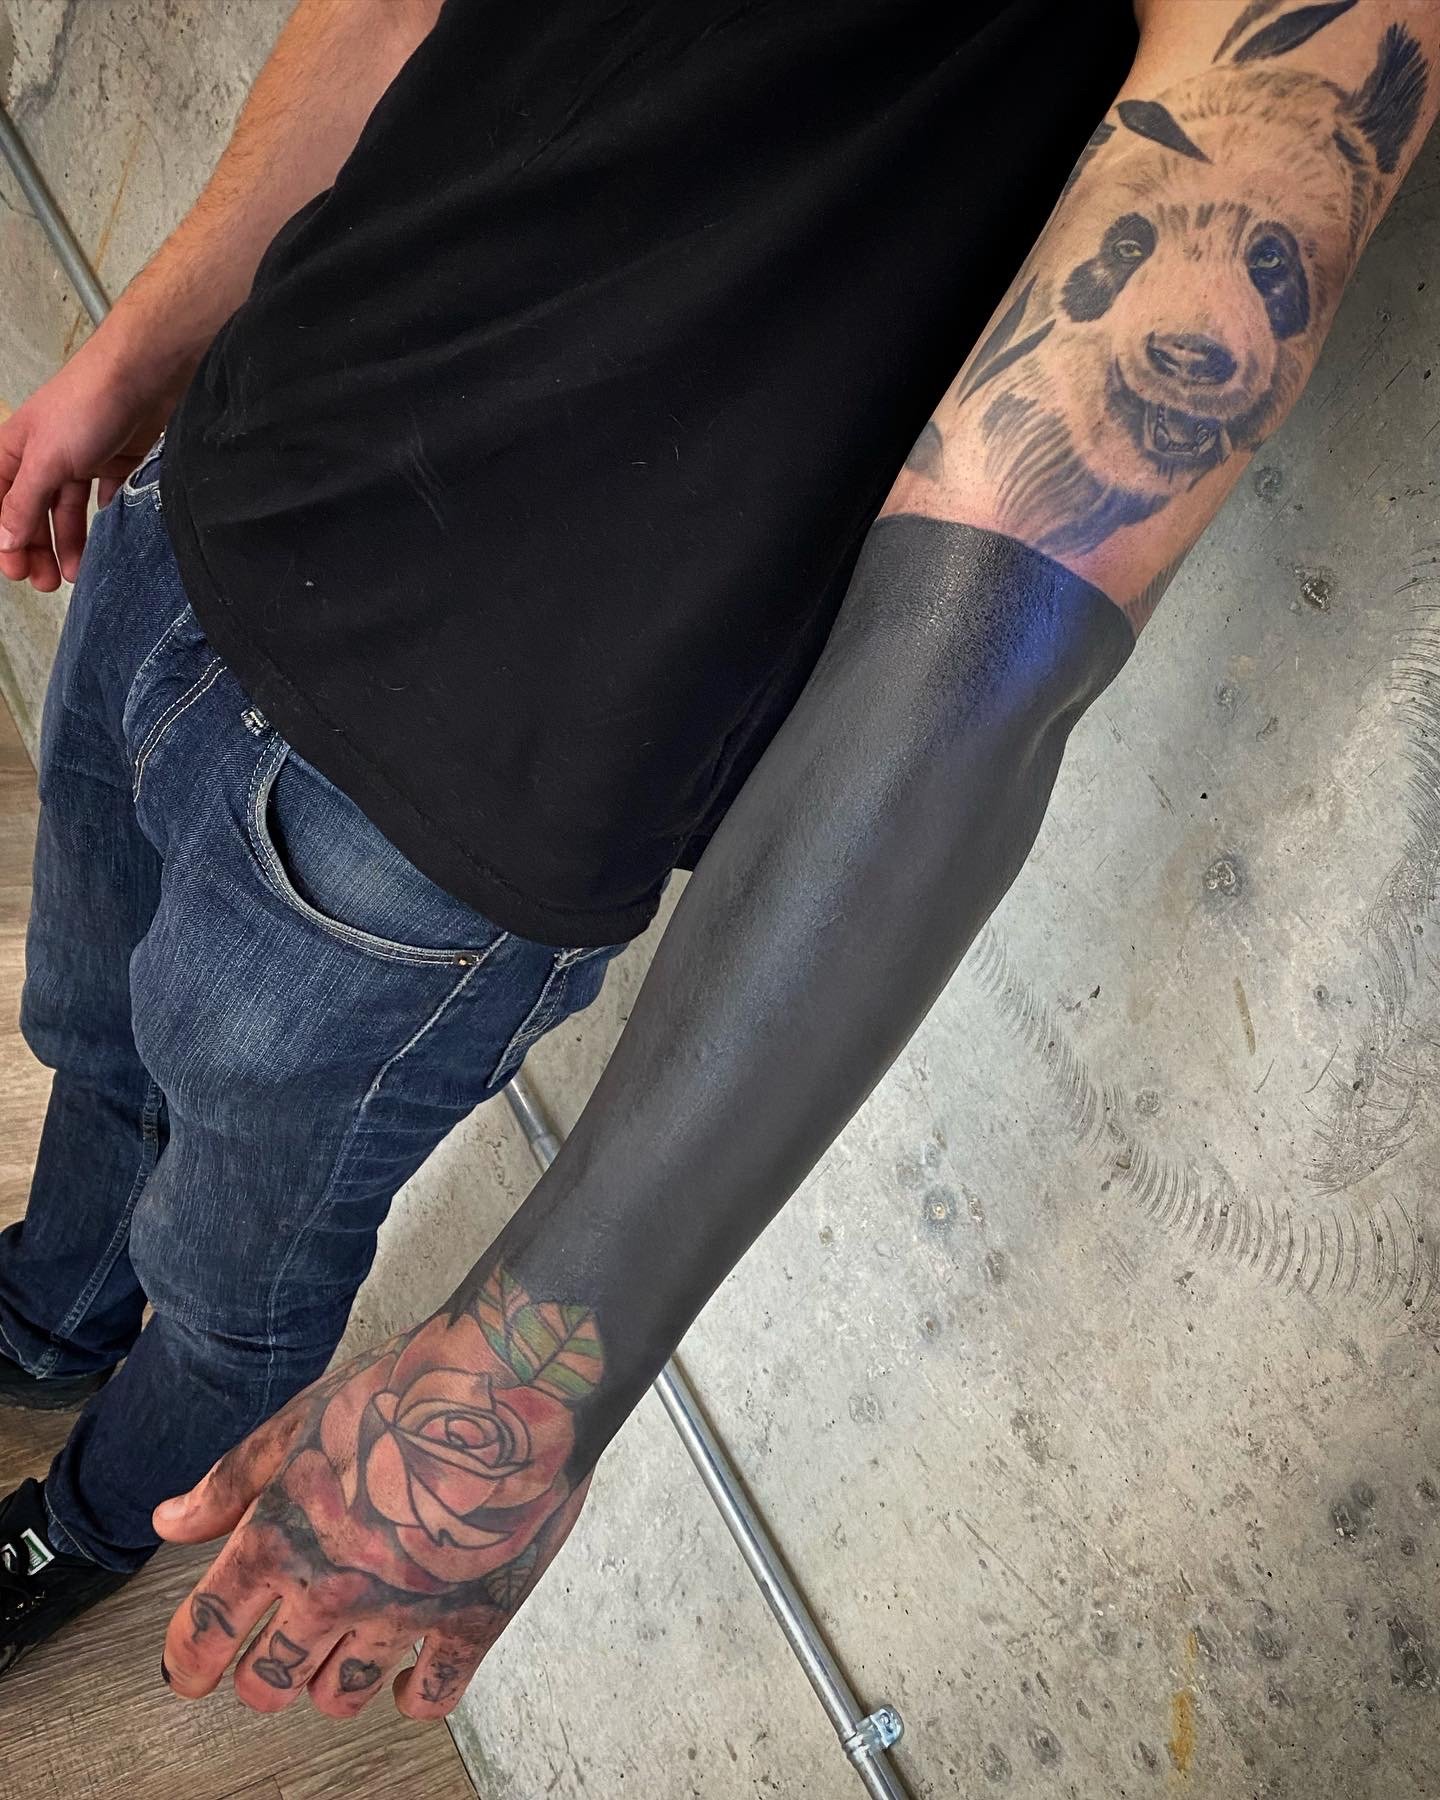 Whole Arm Blackout Tattoo in Only 5 Hours  YouTube